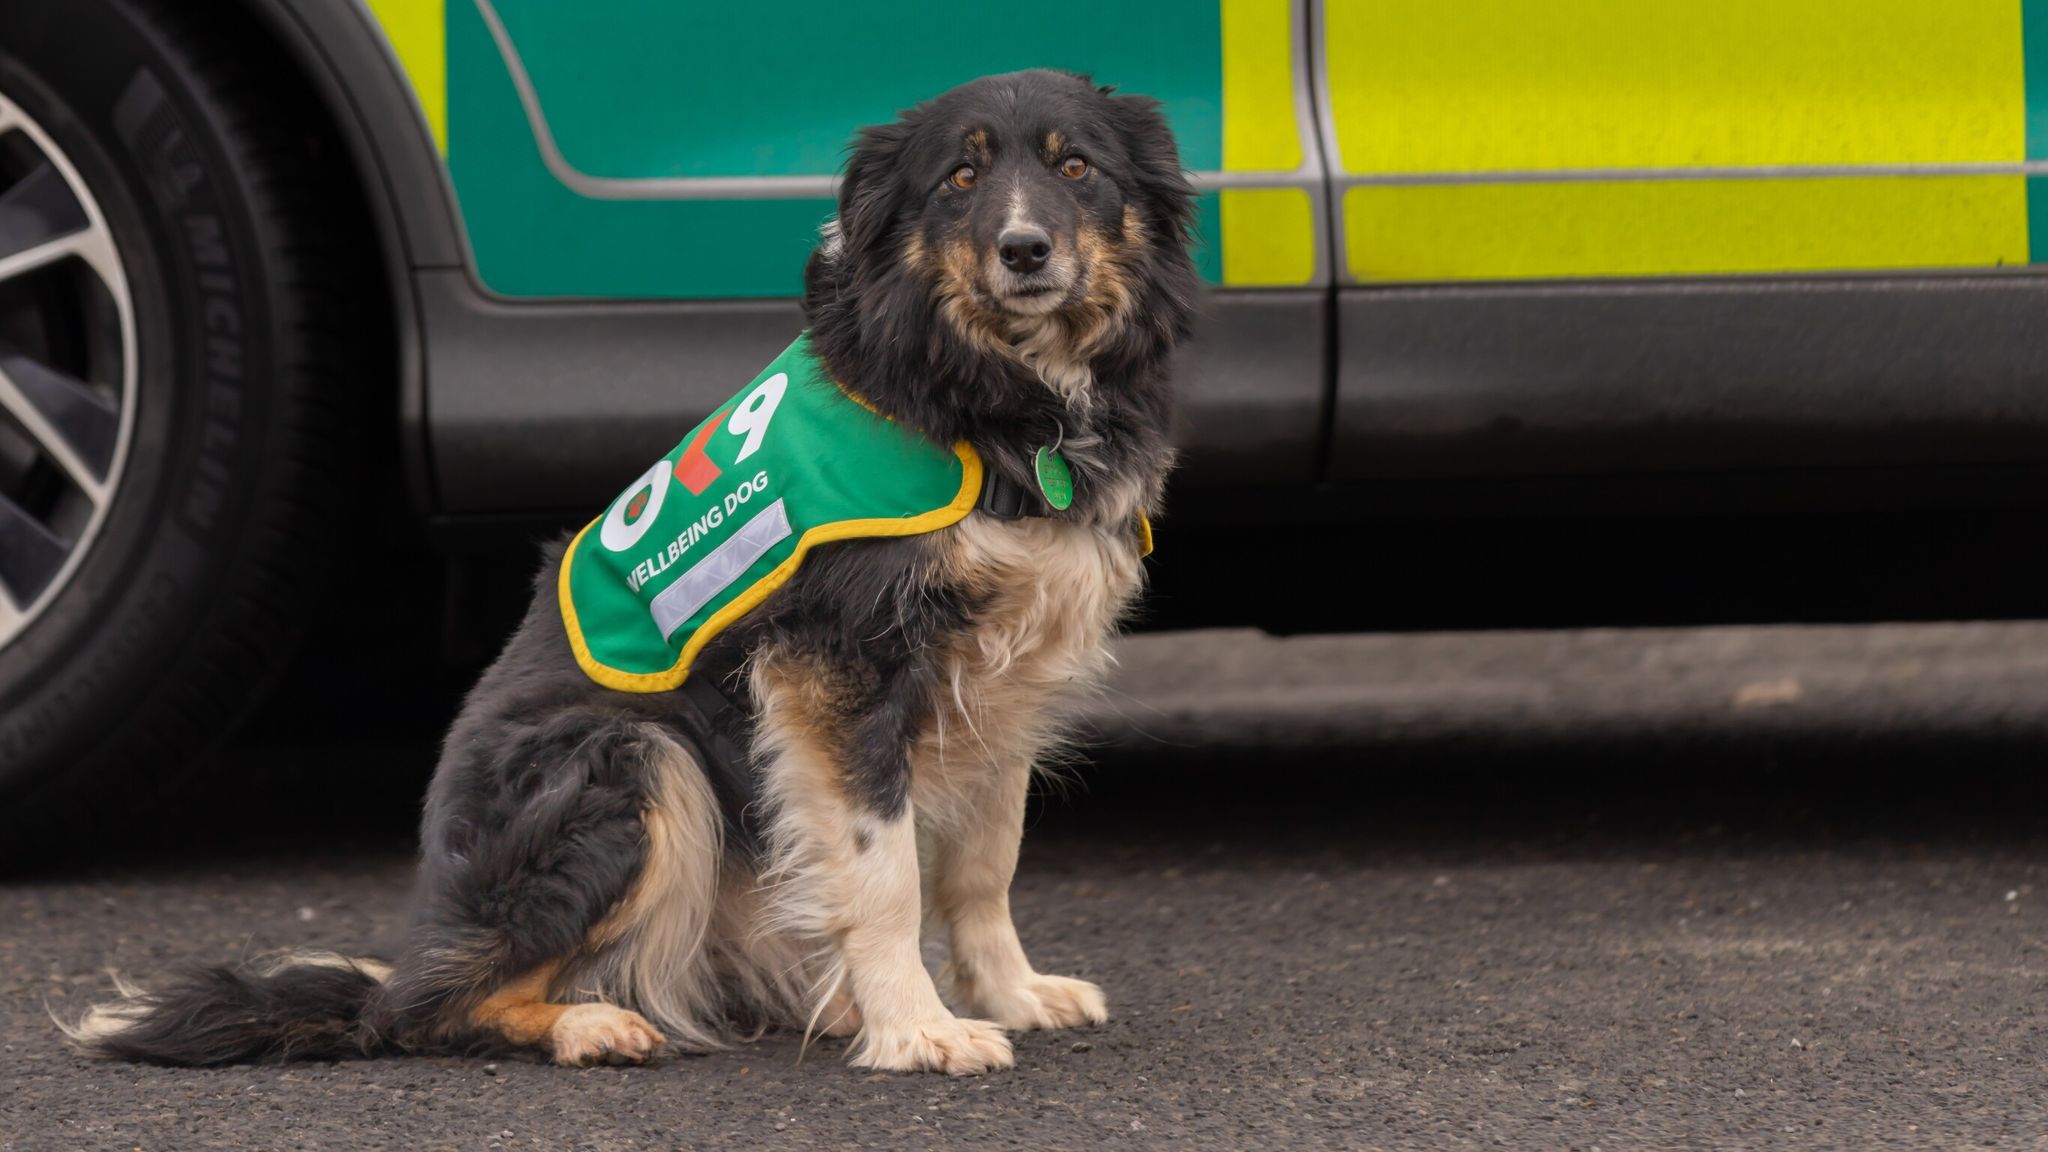 Wellbeing and trauma therapy dog joins Welsh Ambulance Service in UK first  | UK News | Sky News